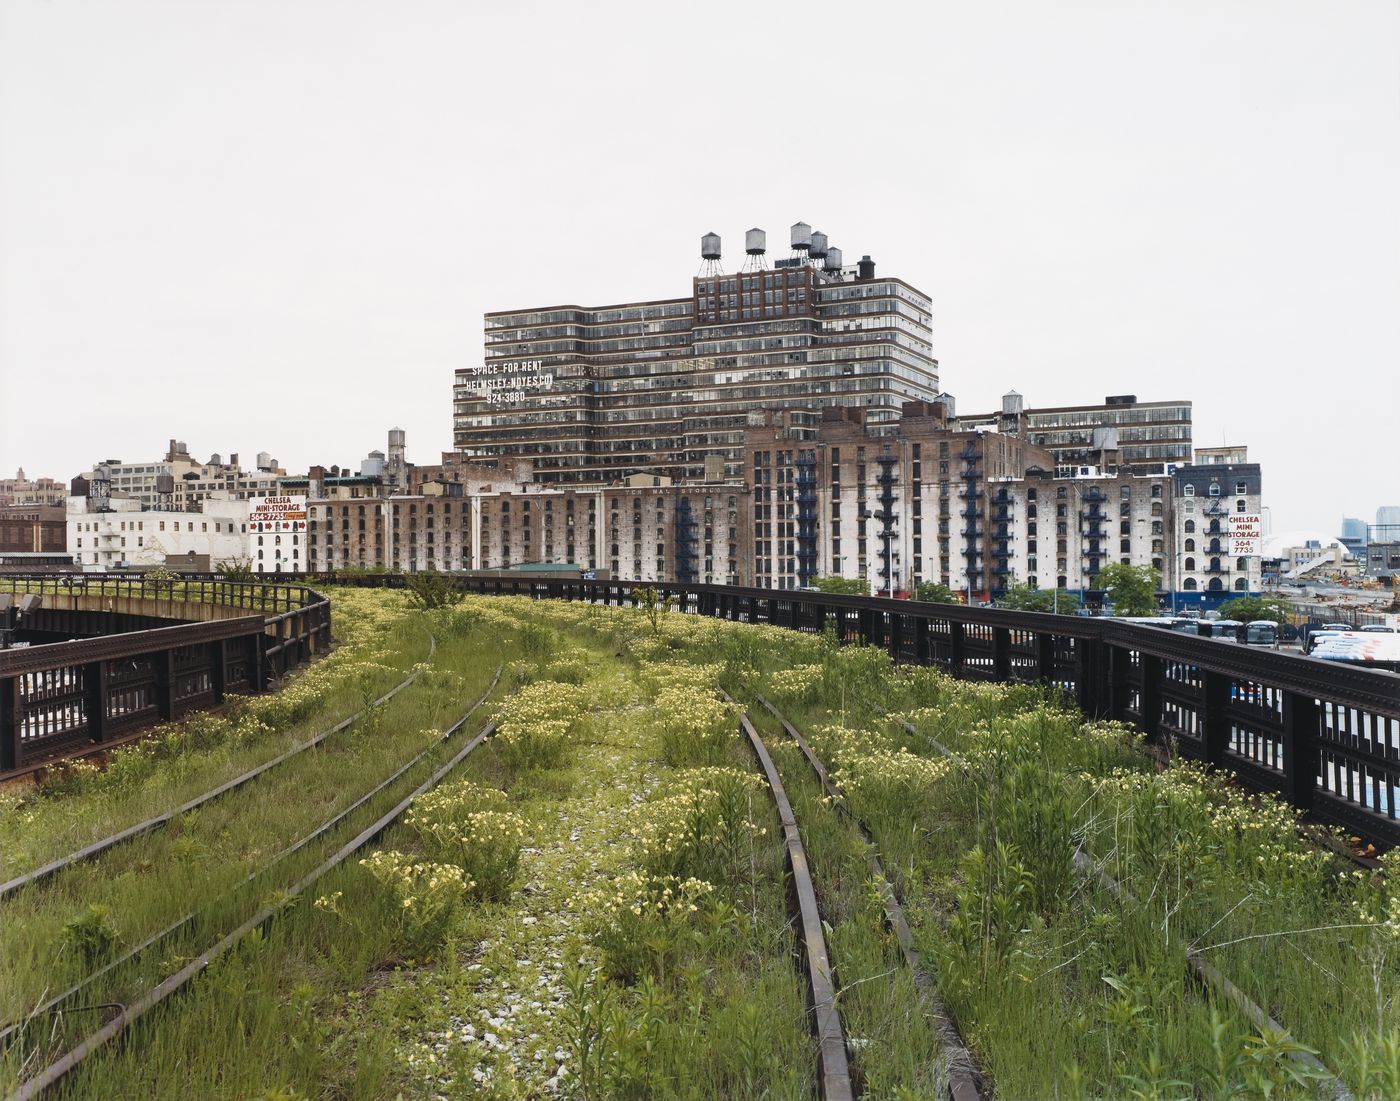 View of The High Line abandoned elevated railway with the Starrett-Lehigh Building, New York City, New York, United States